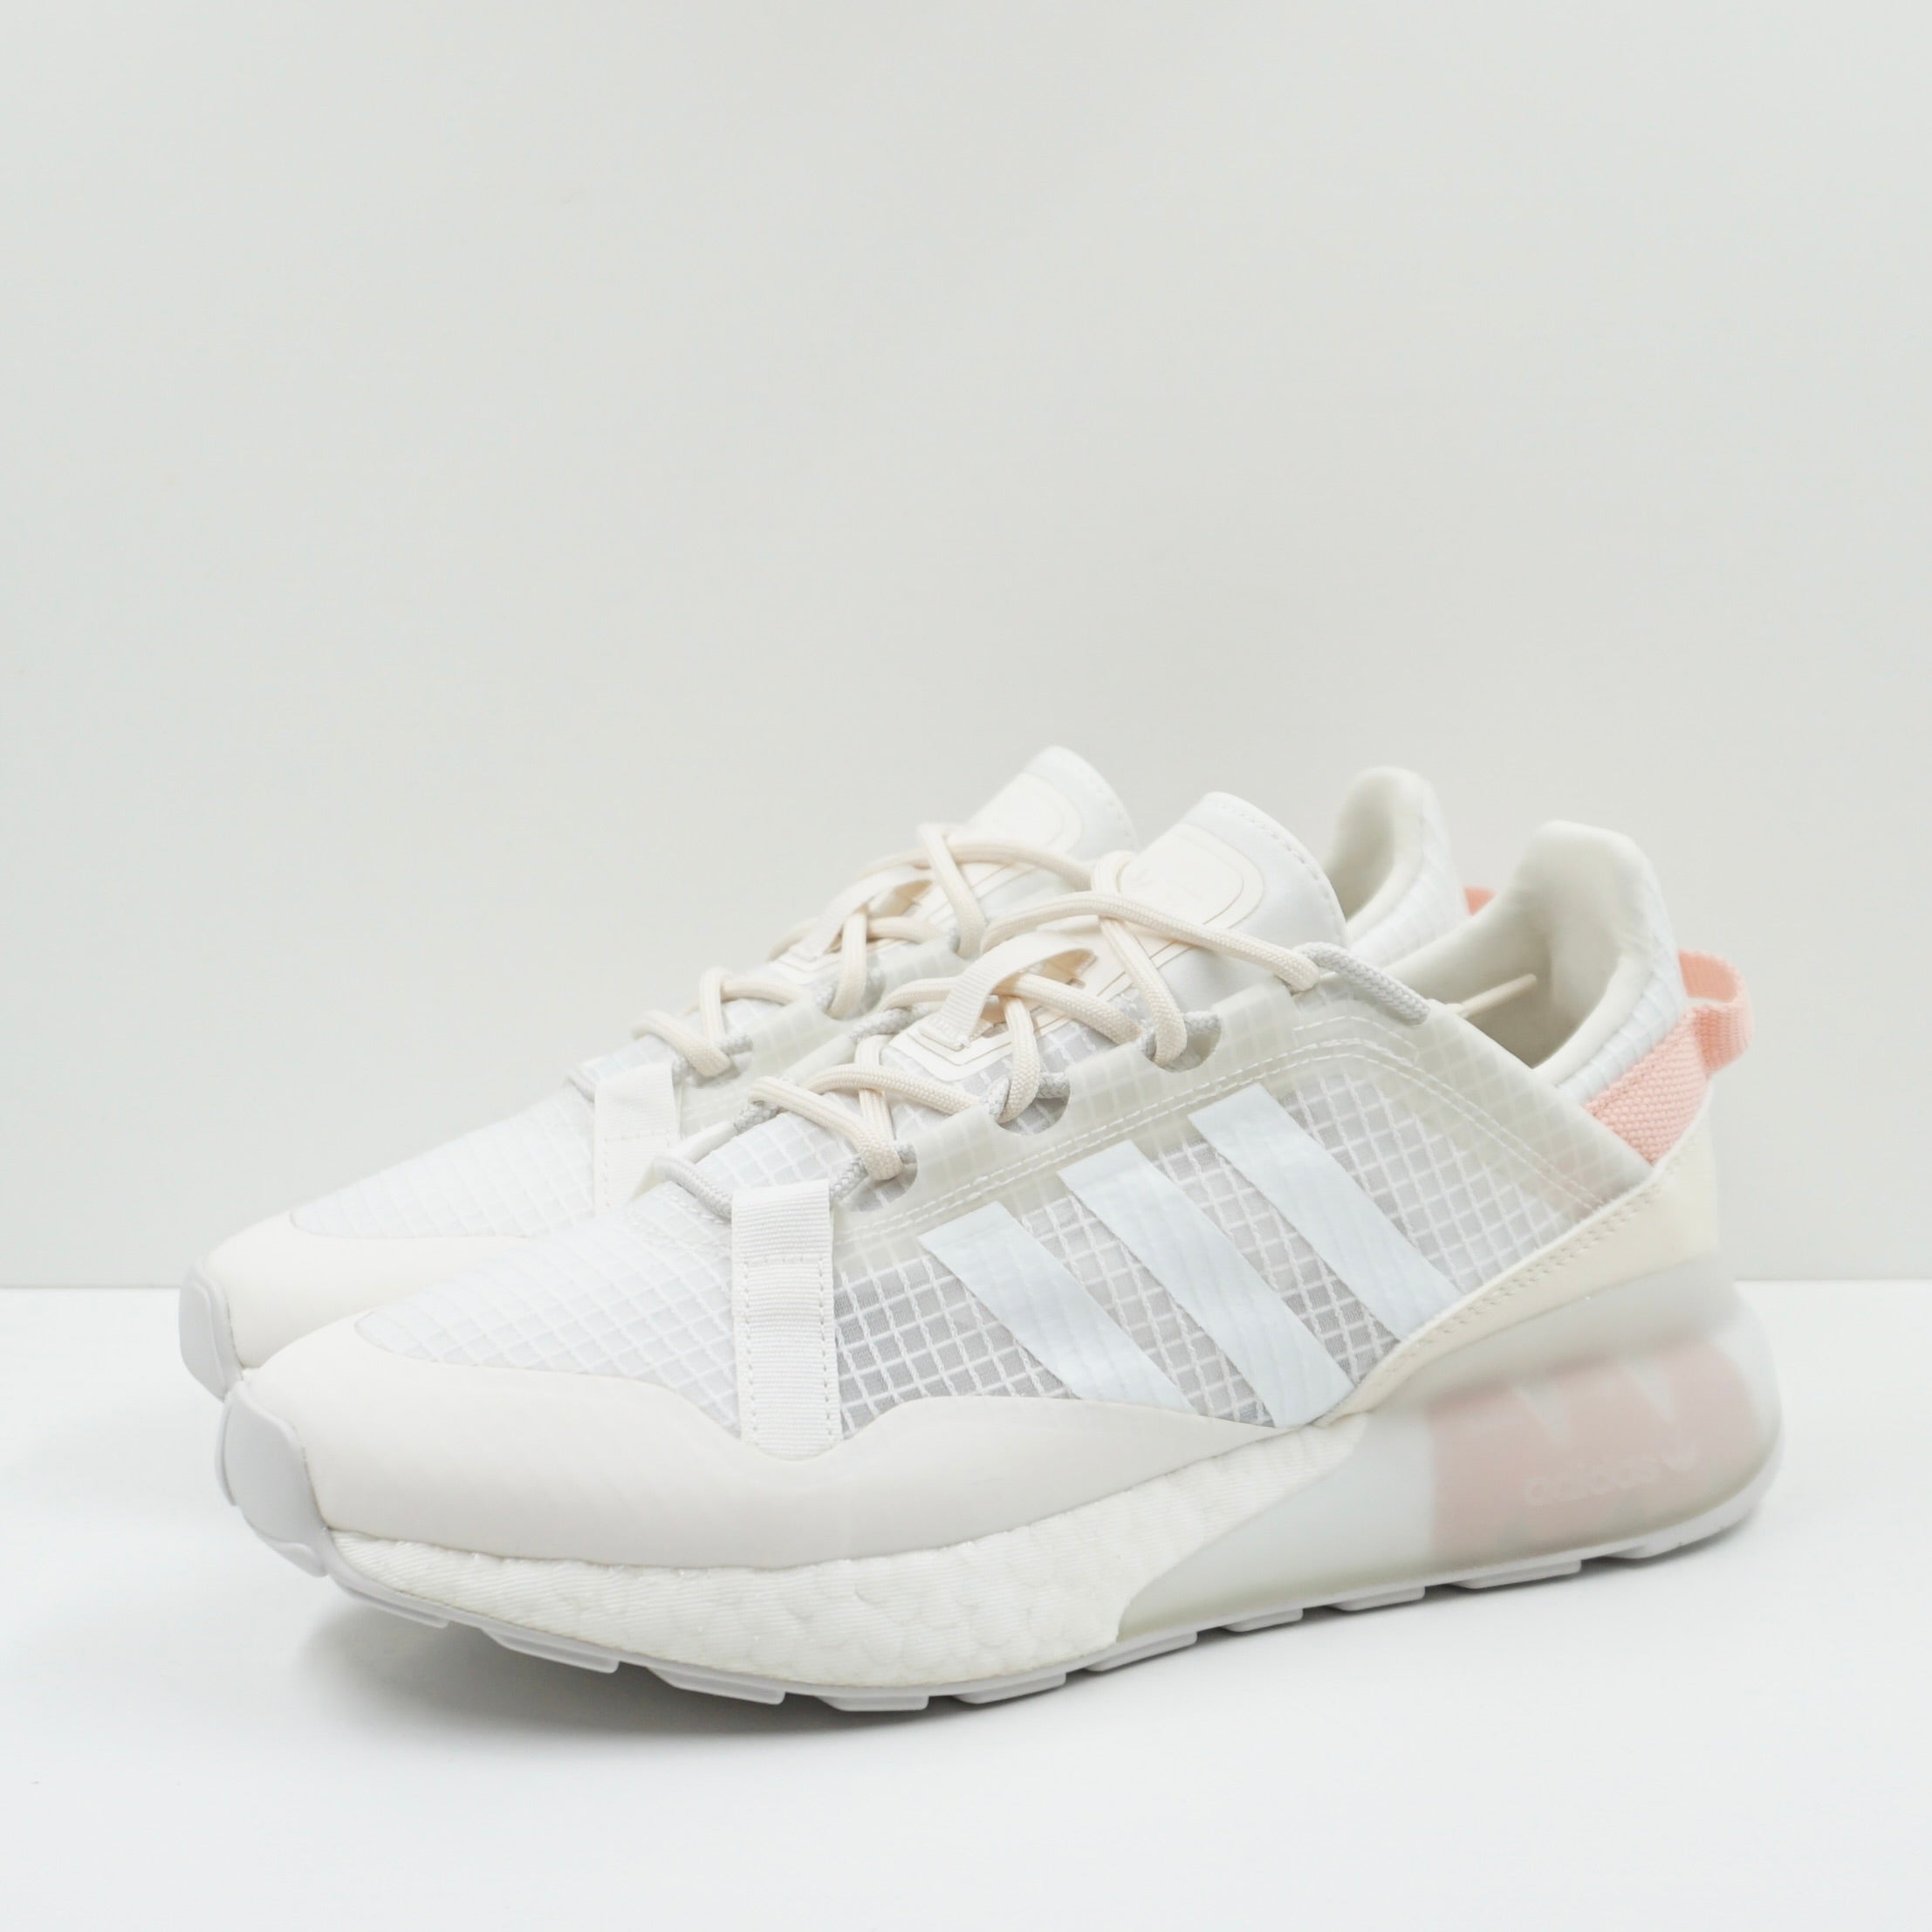 Adidas ZX 2K Boost Pure Core White Grey One (W)